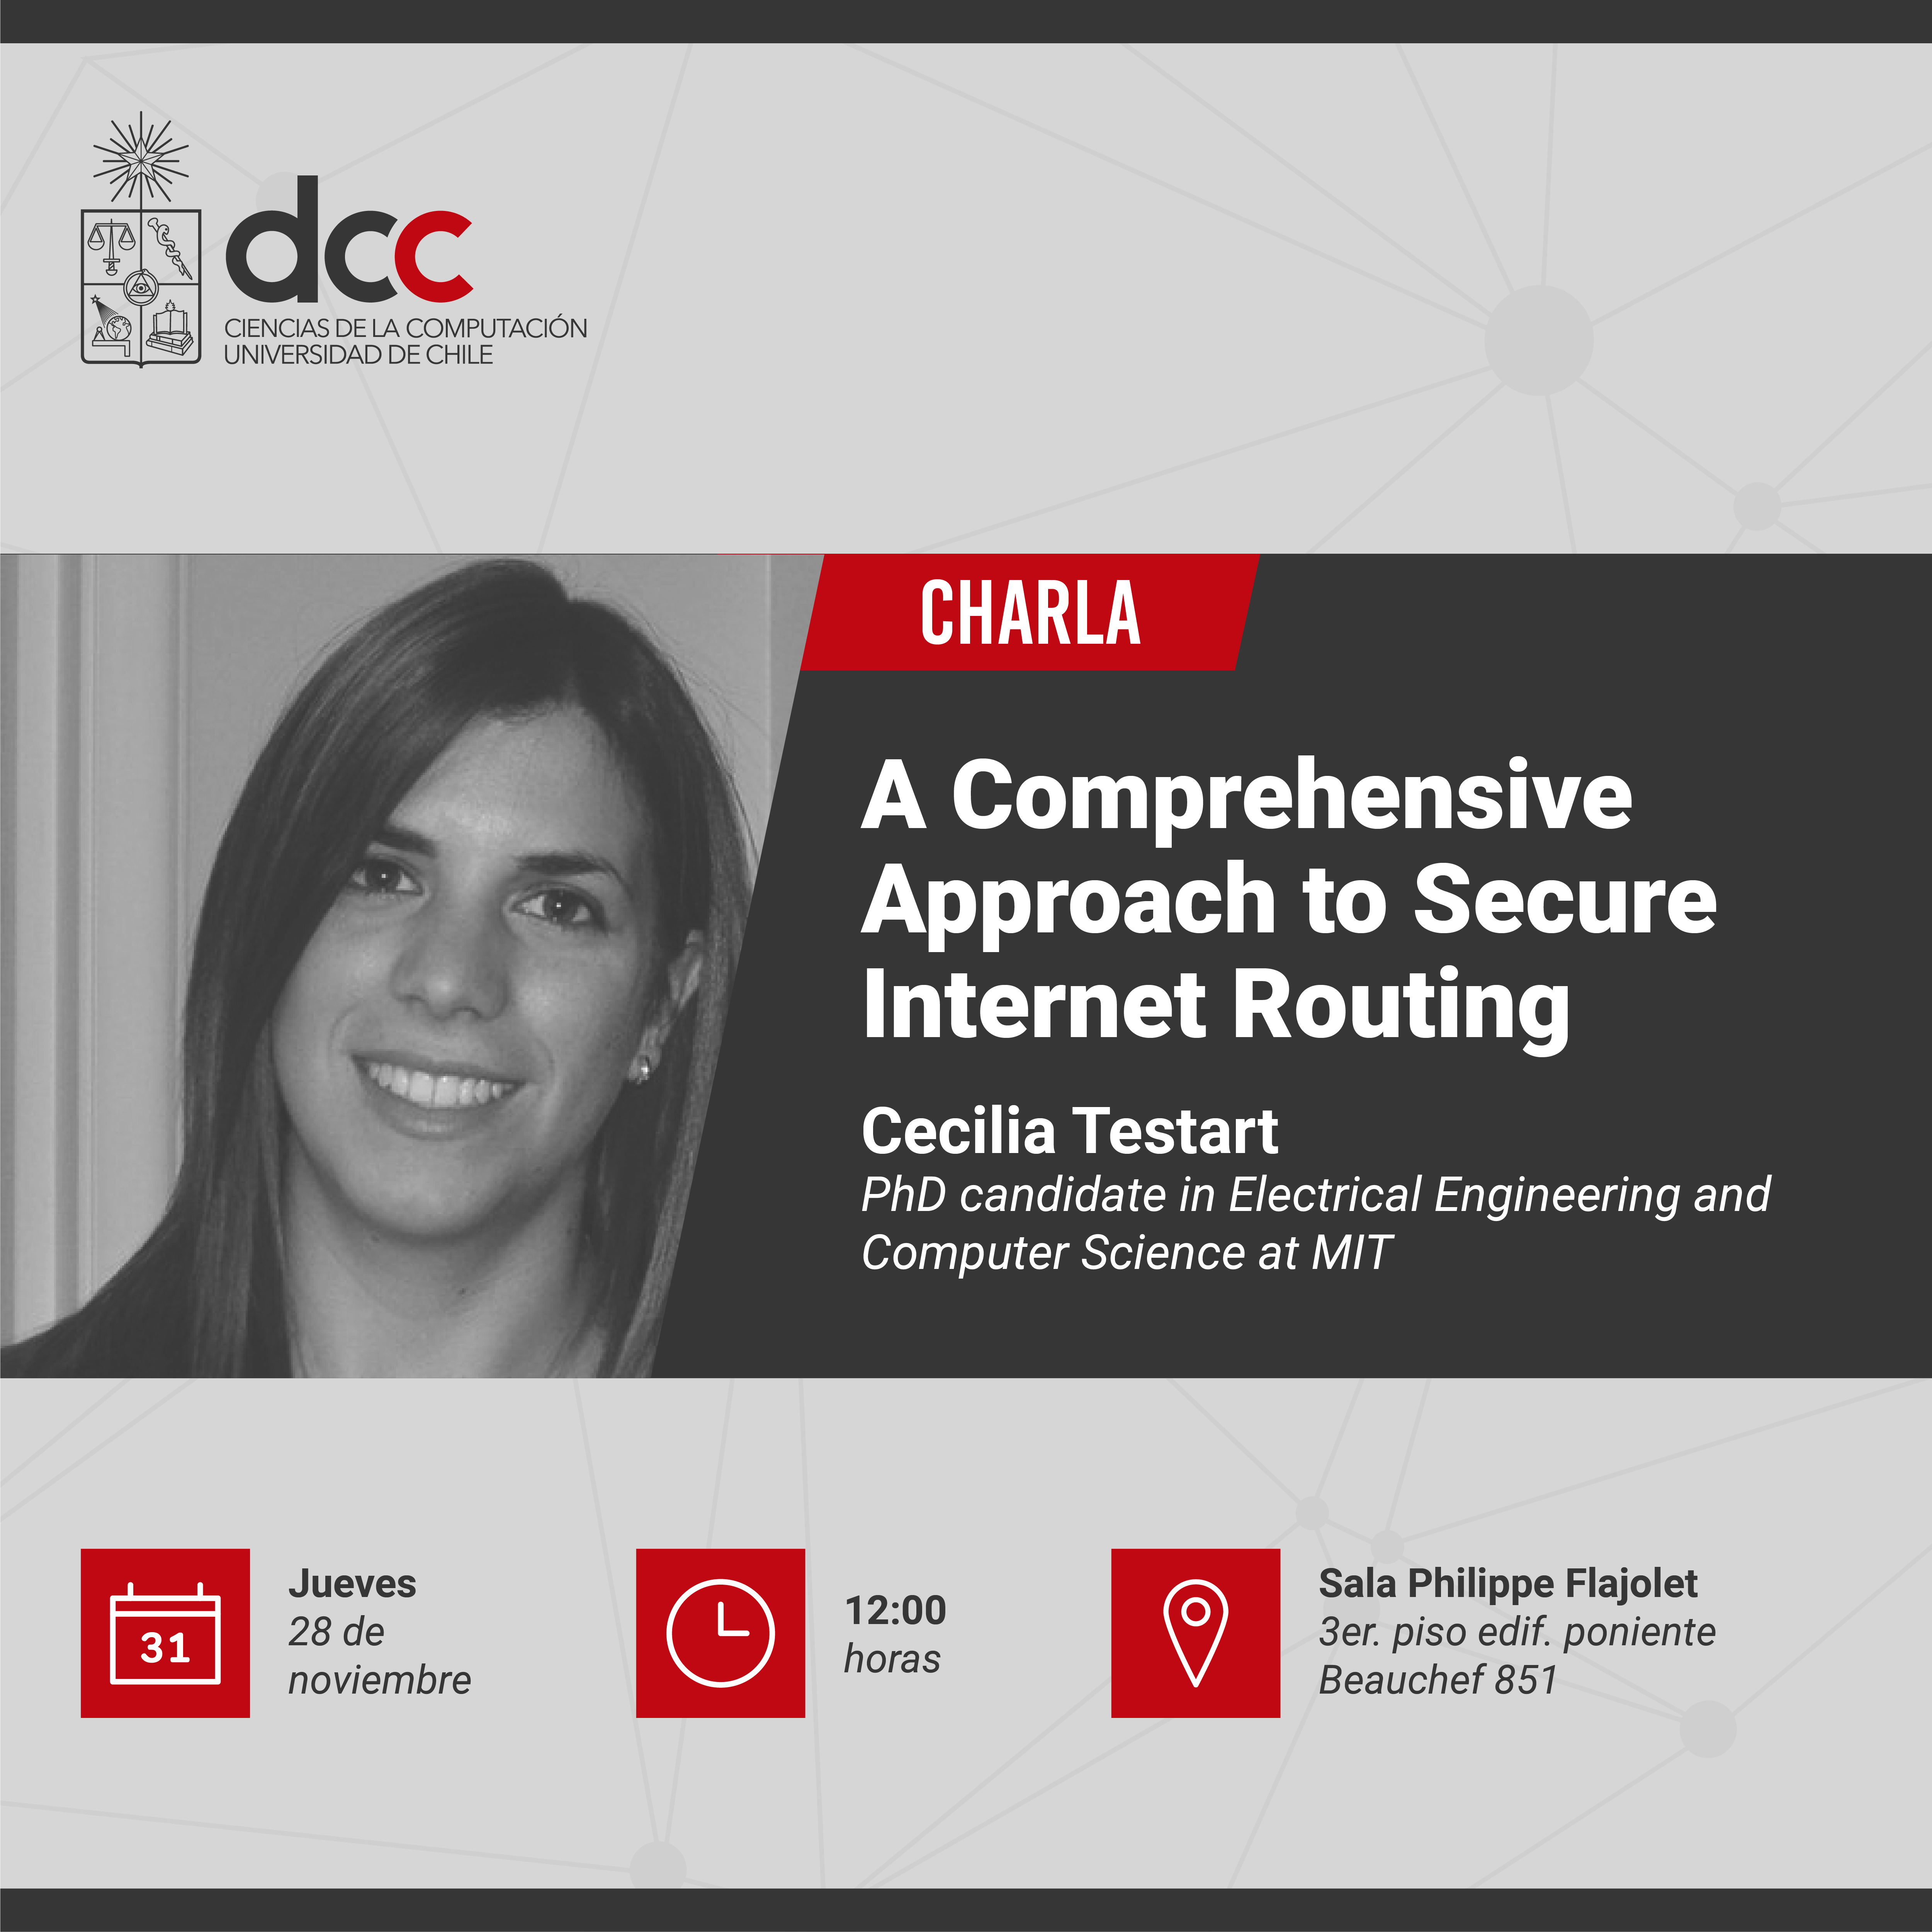 Charla: A Comprehensive Approach to Secure Internet Routing / 28 de noviembre - 12:00 hrs. - Sala Philippe Flajolet